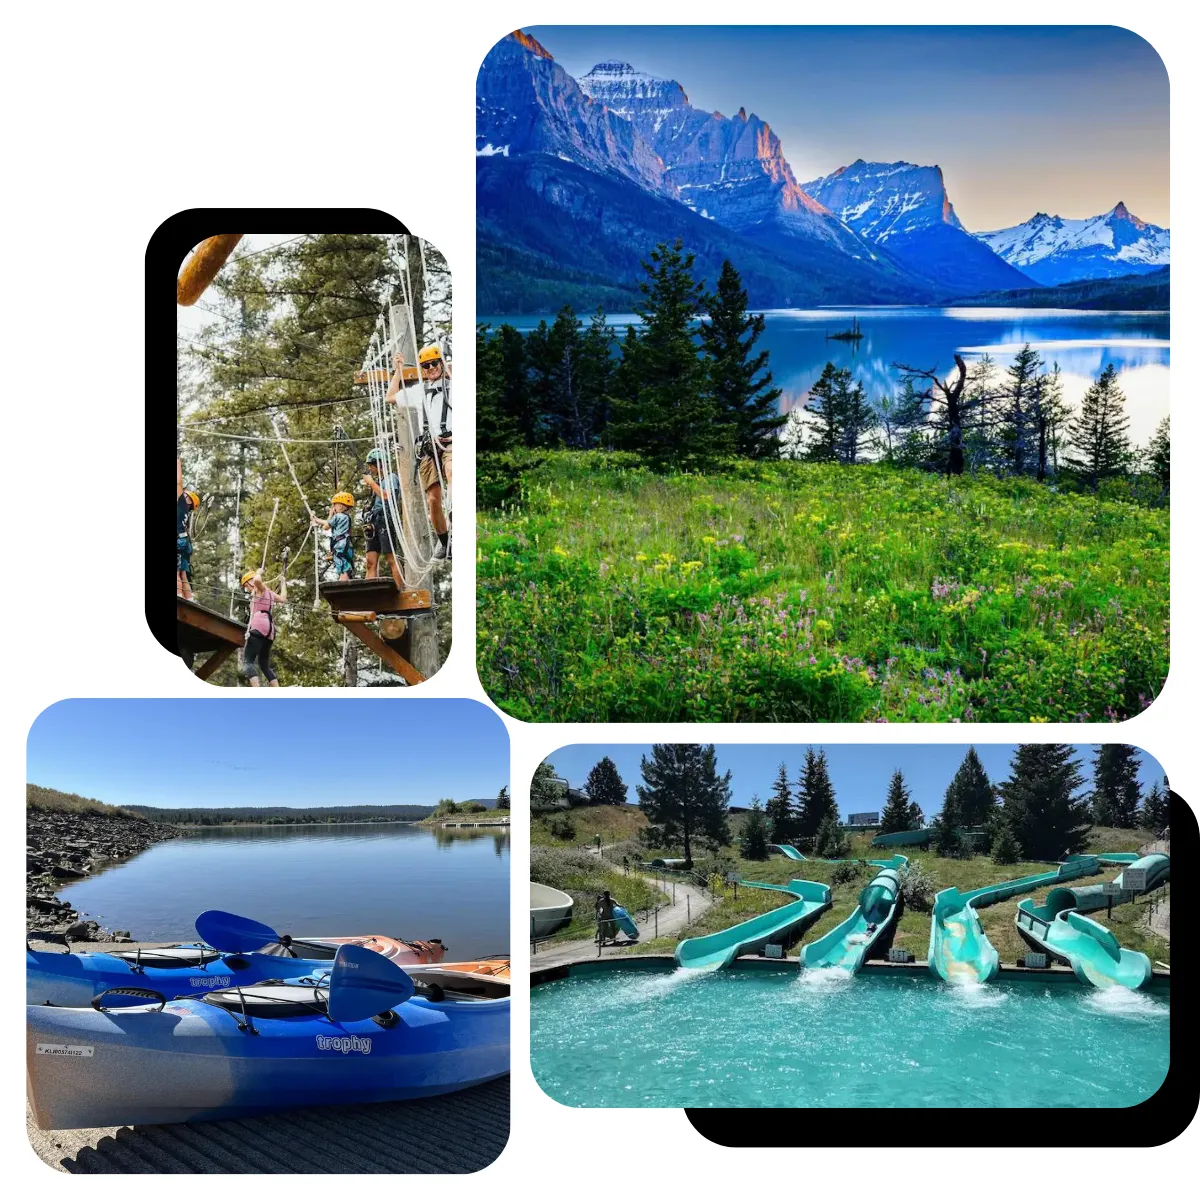 Paradise Vacations near Glacier National Park and Flathead Lake offers thrilling activities like ziplining and water slides, with relaxing fire and hot tub amenities, and beachside accommodations with scenic views.